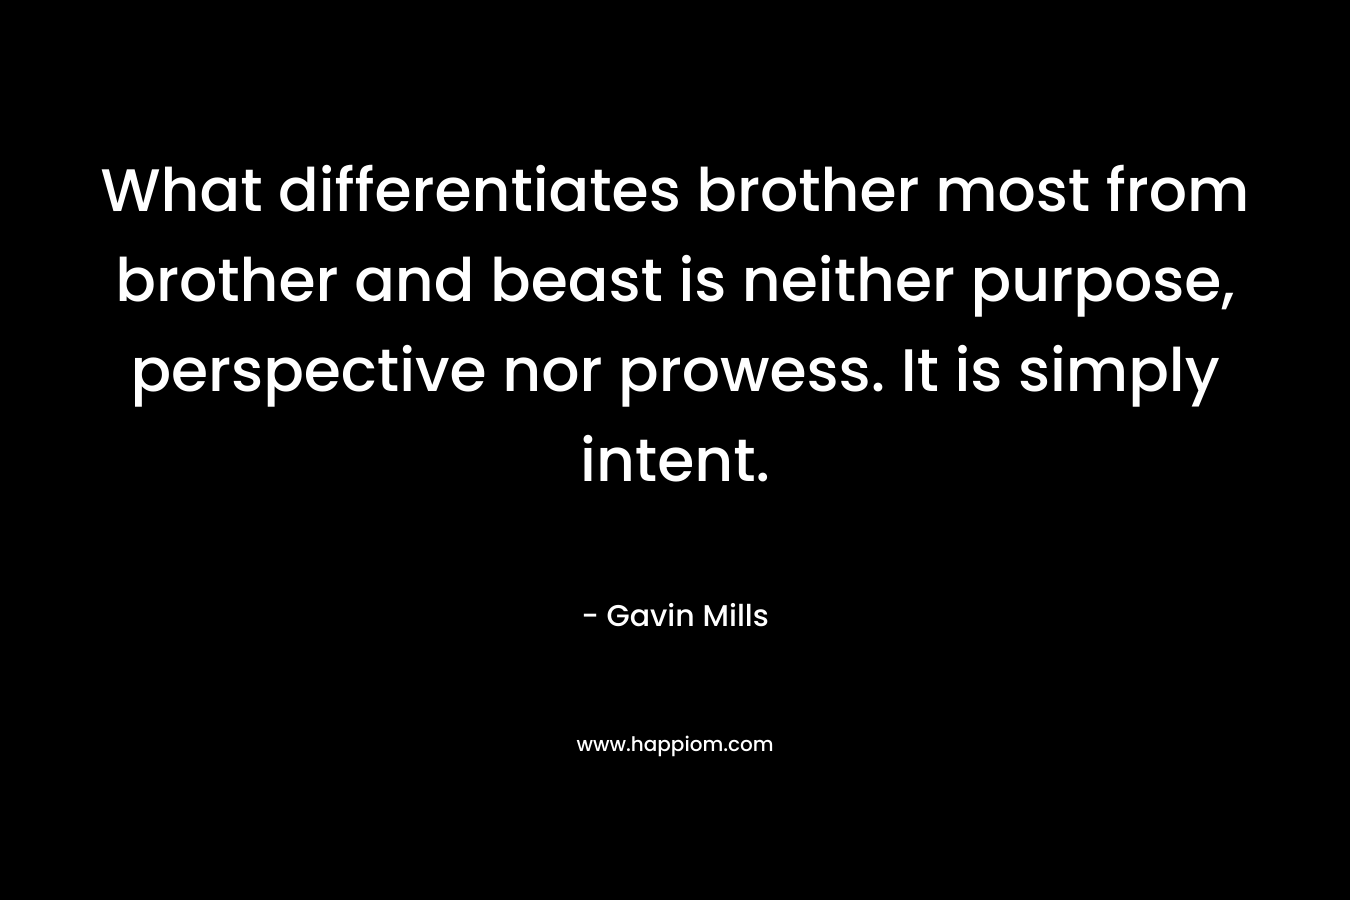 What differentiates brother most from brother and beast is neither purpose, perspective nor prowess. It is simply intent. – Gavin Mills